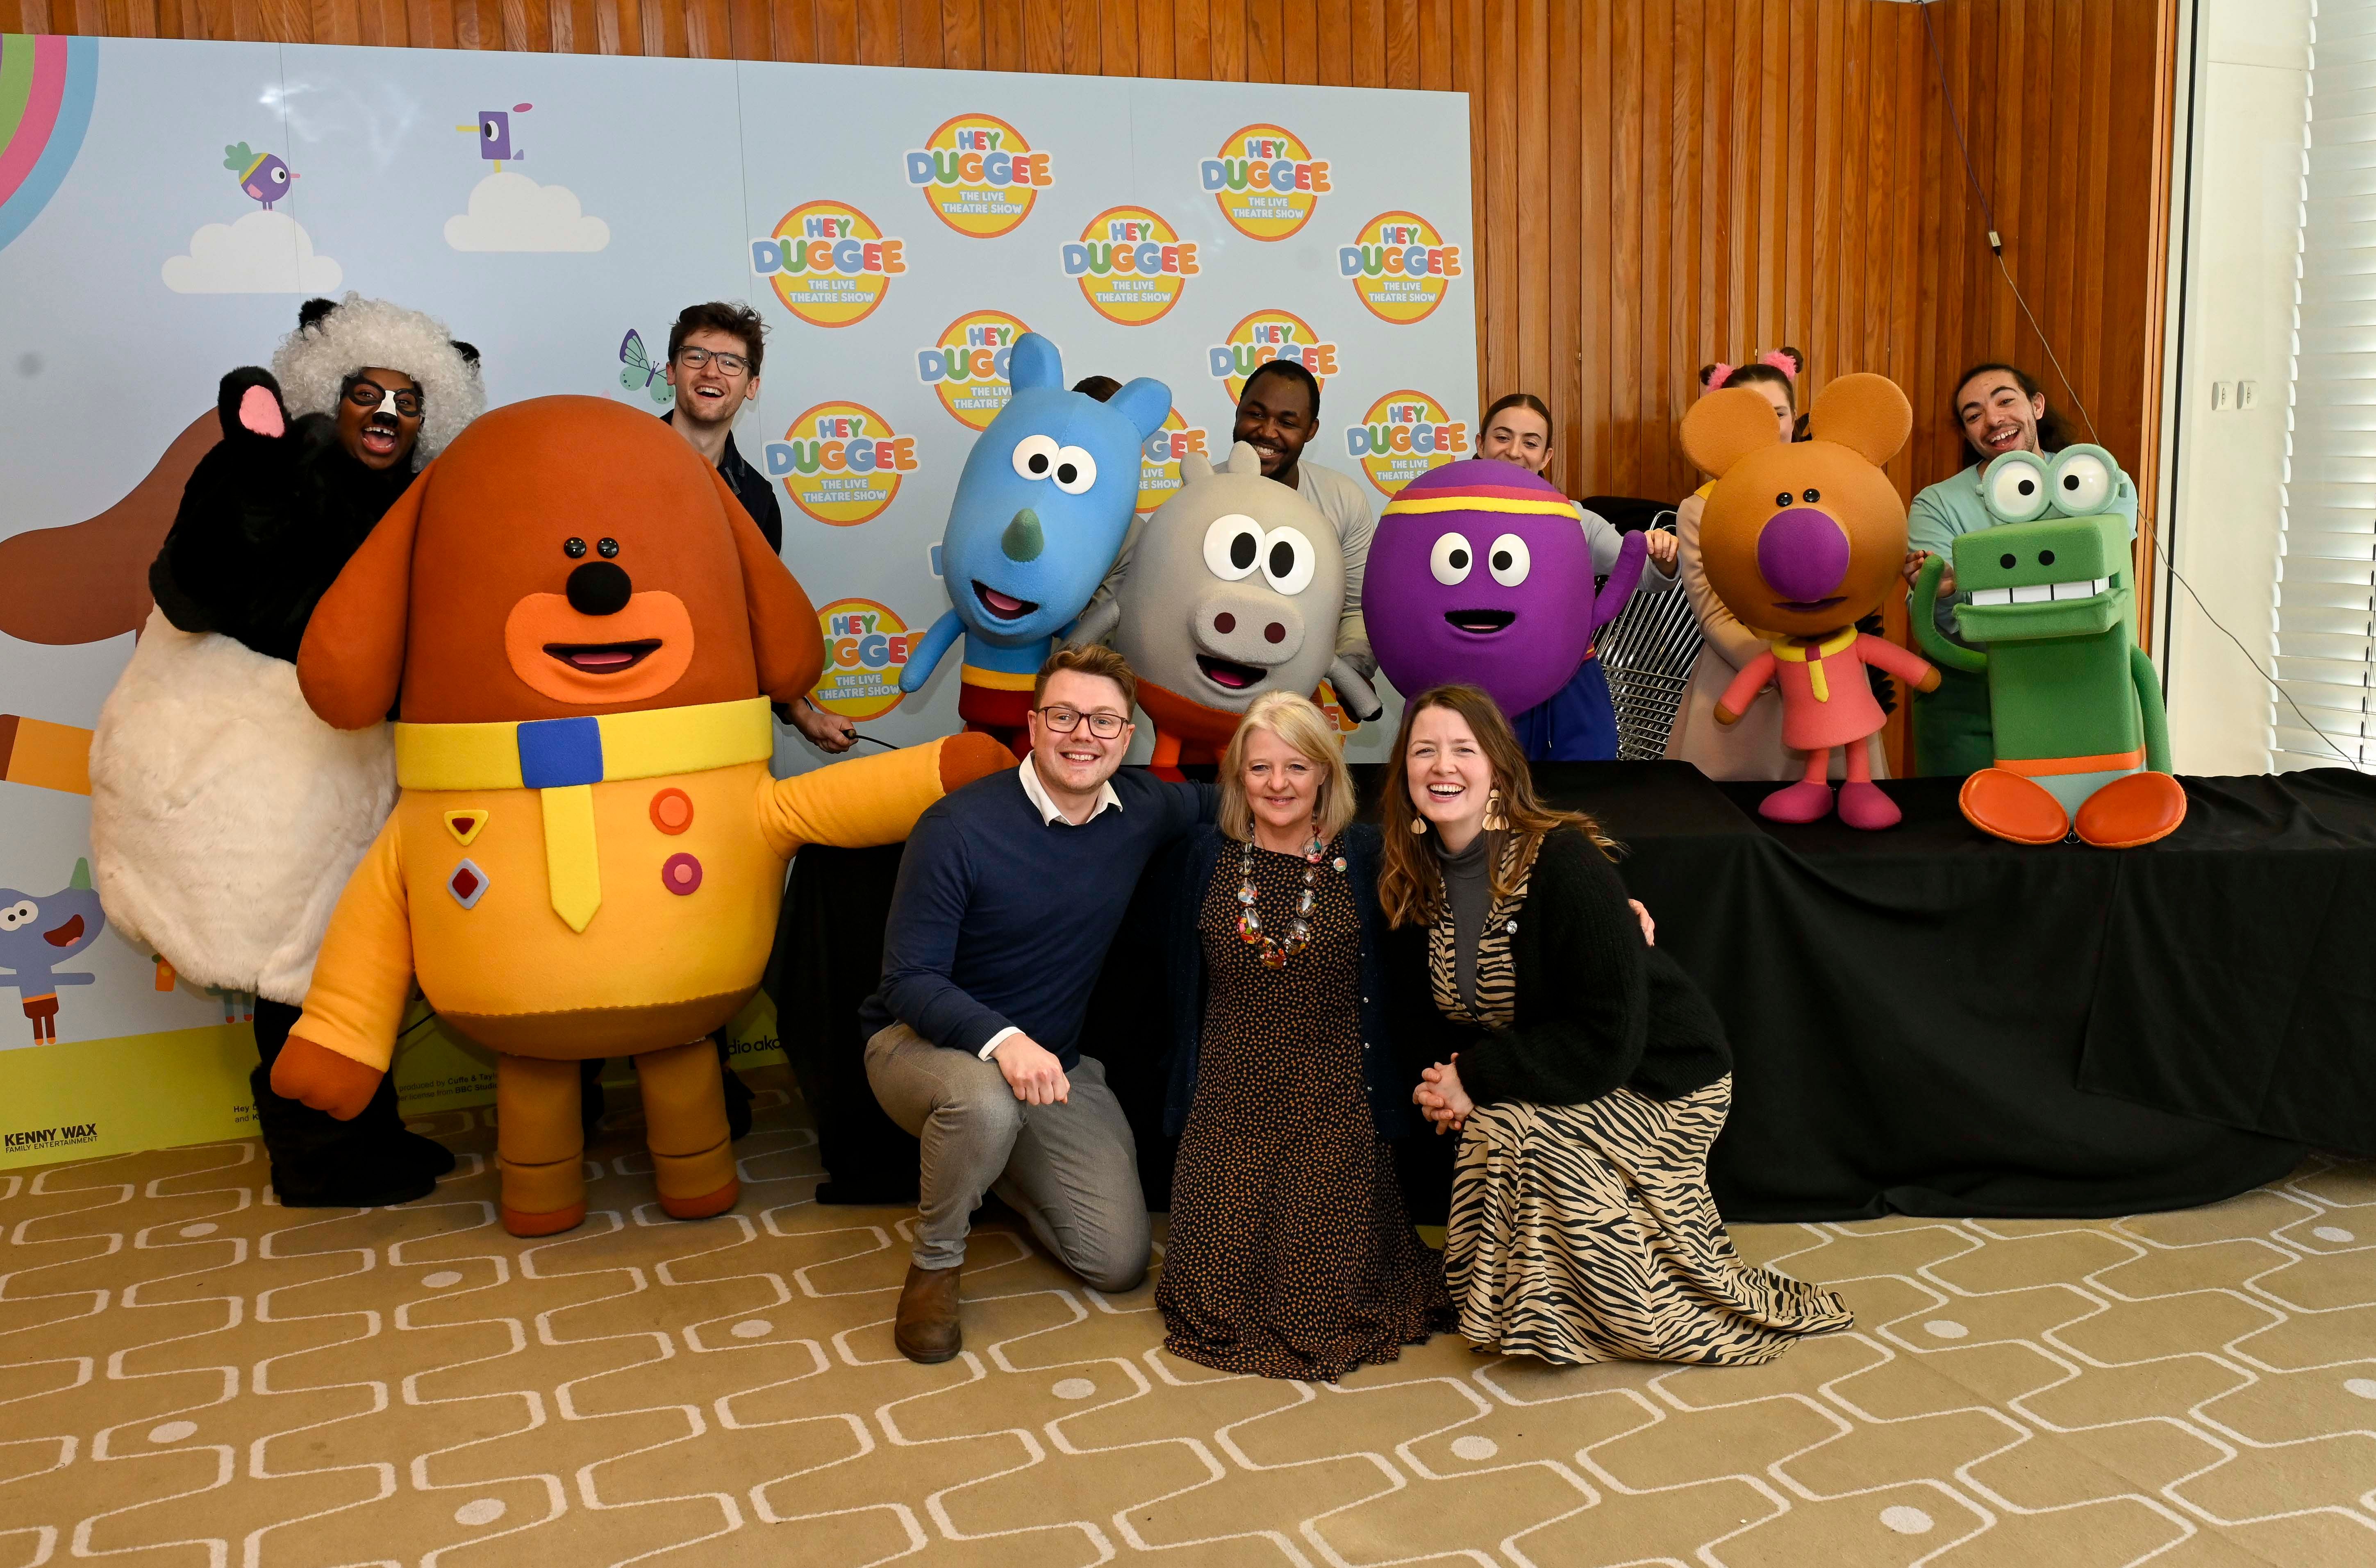 The amazing Hey Duggee Puppets .